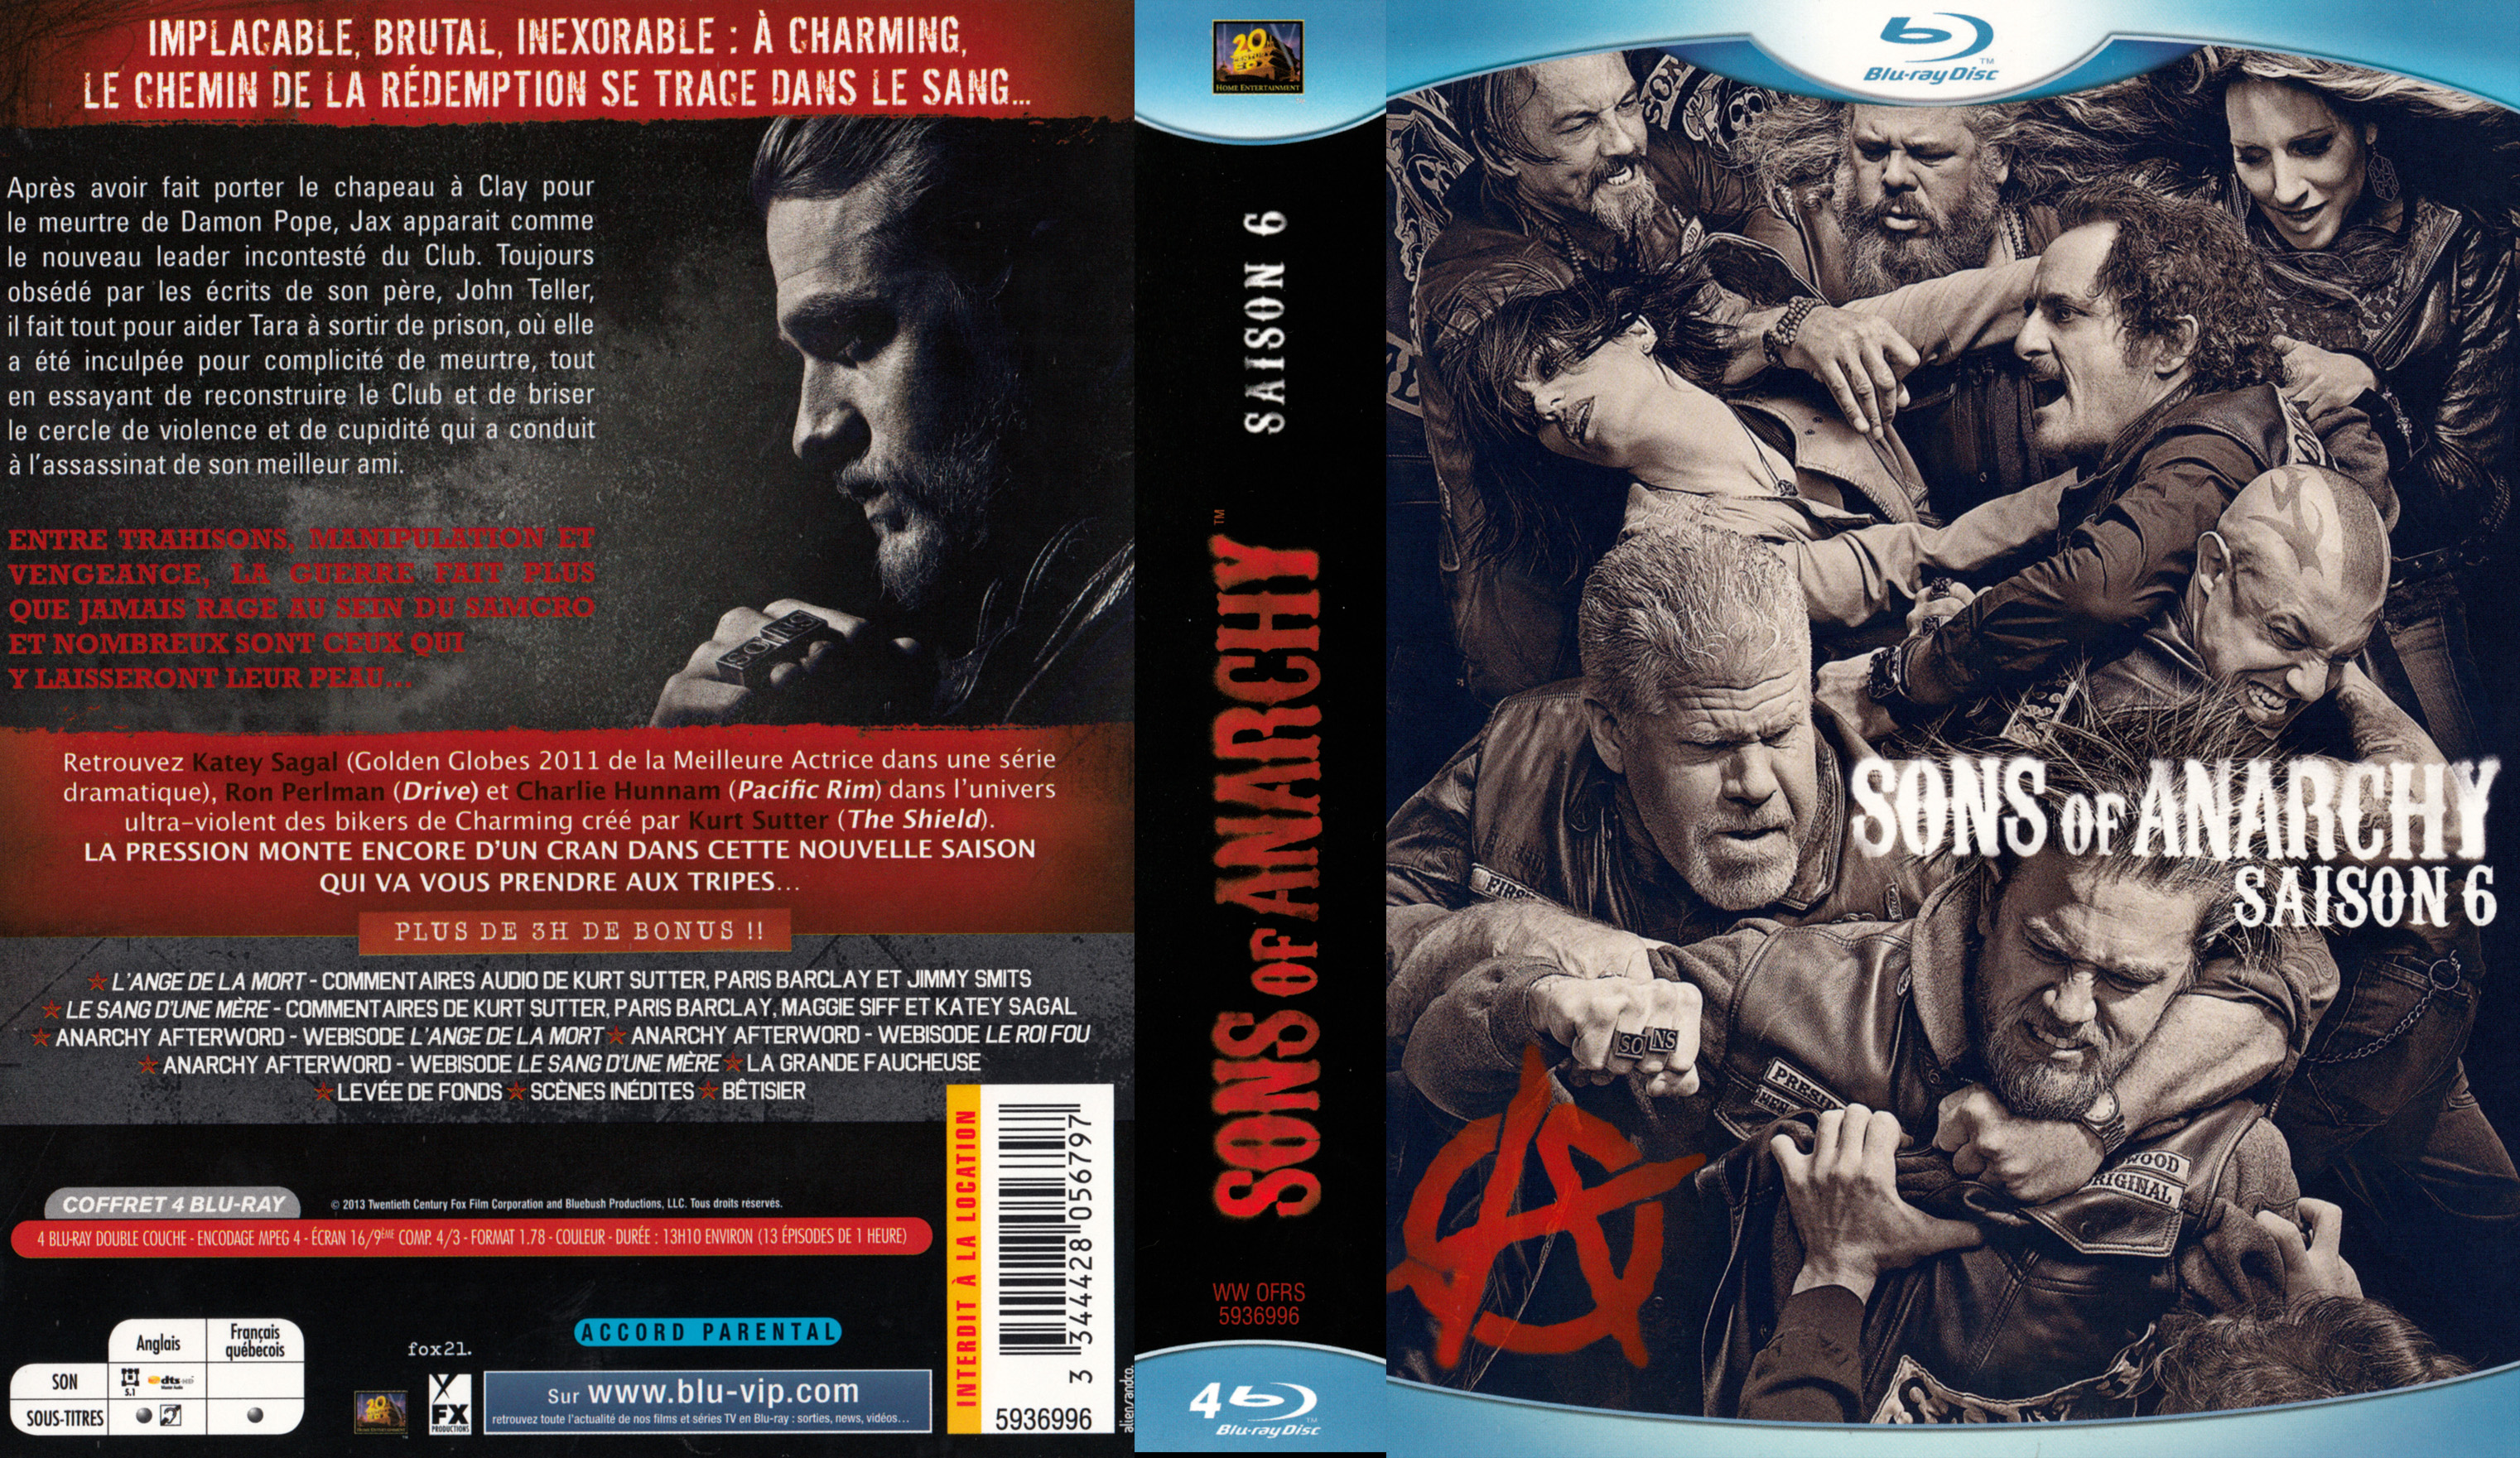 Jaquette DVD Sons of anarchy Saison 6 COFFRET (BLU-RAY)